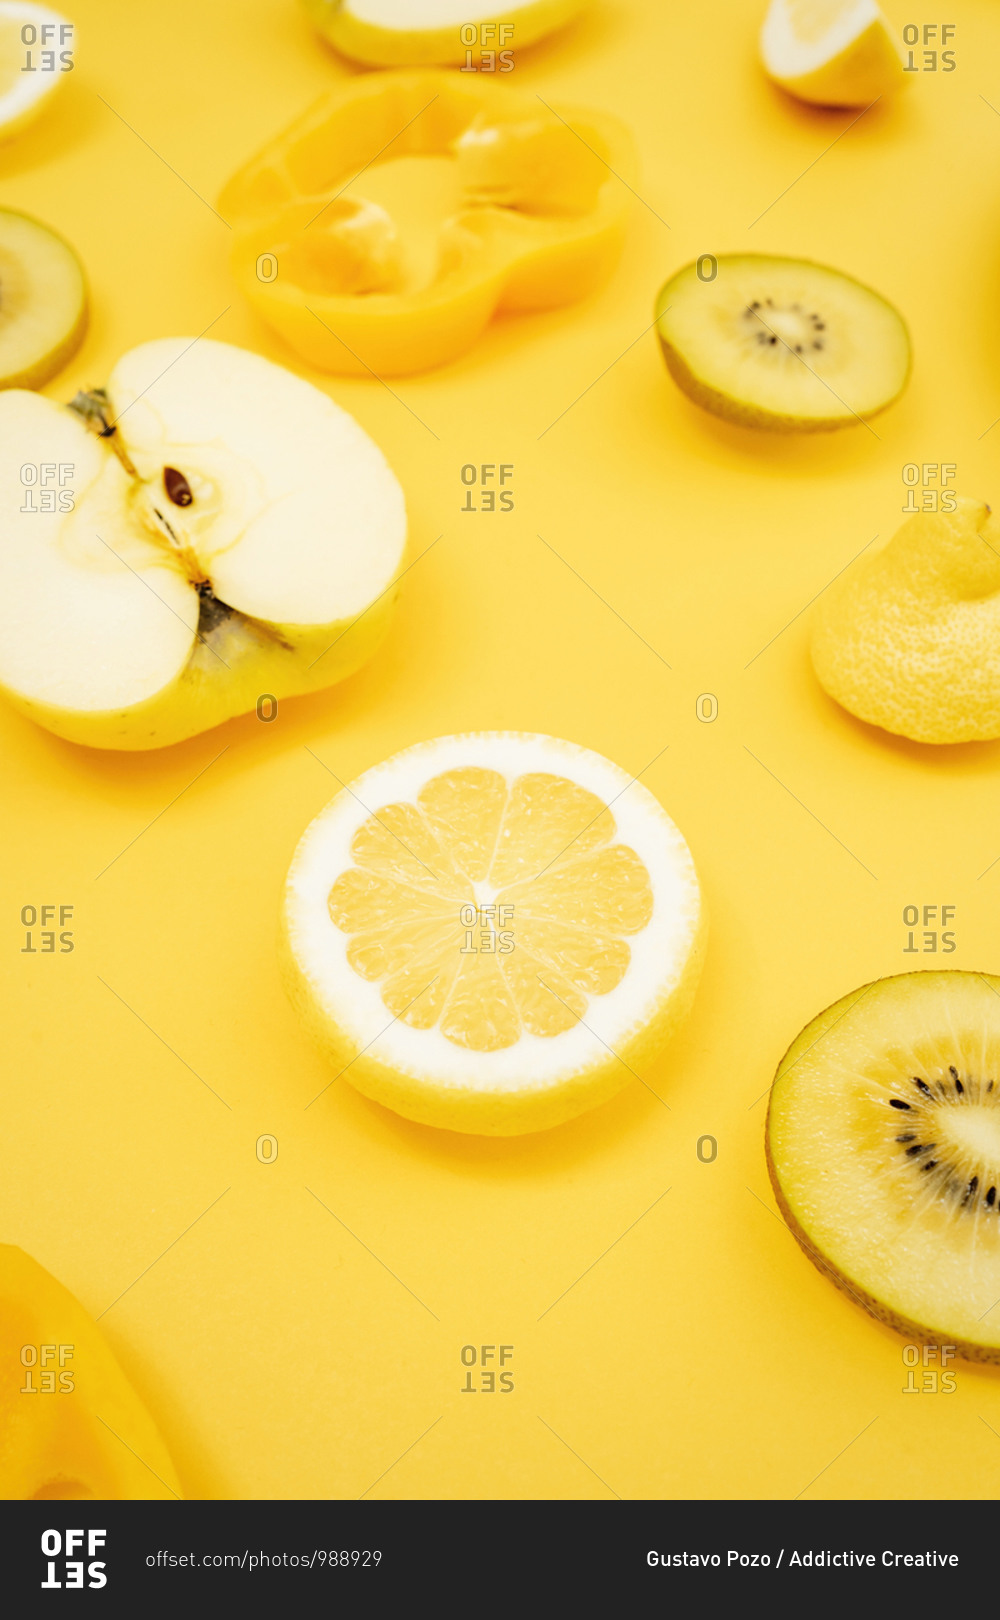 Top view of various fresh fruits and vegetables arranged on yellow background